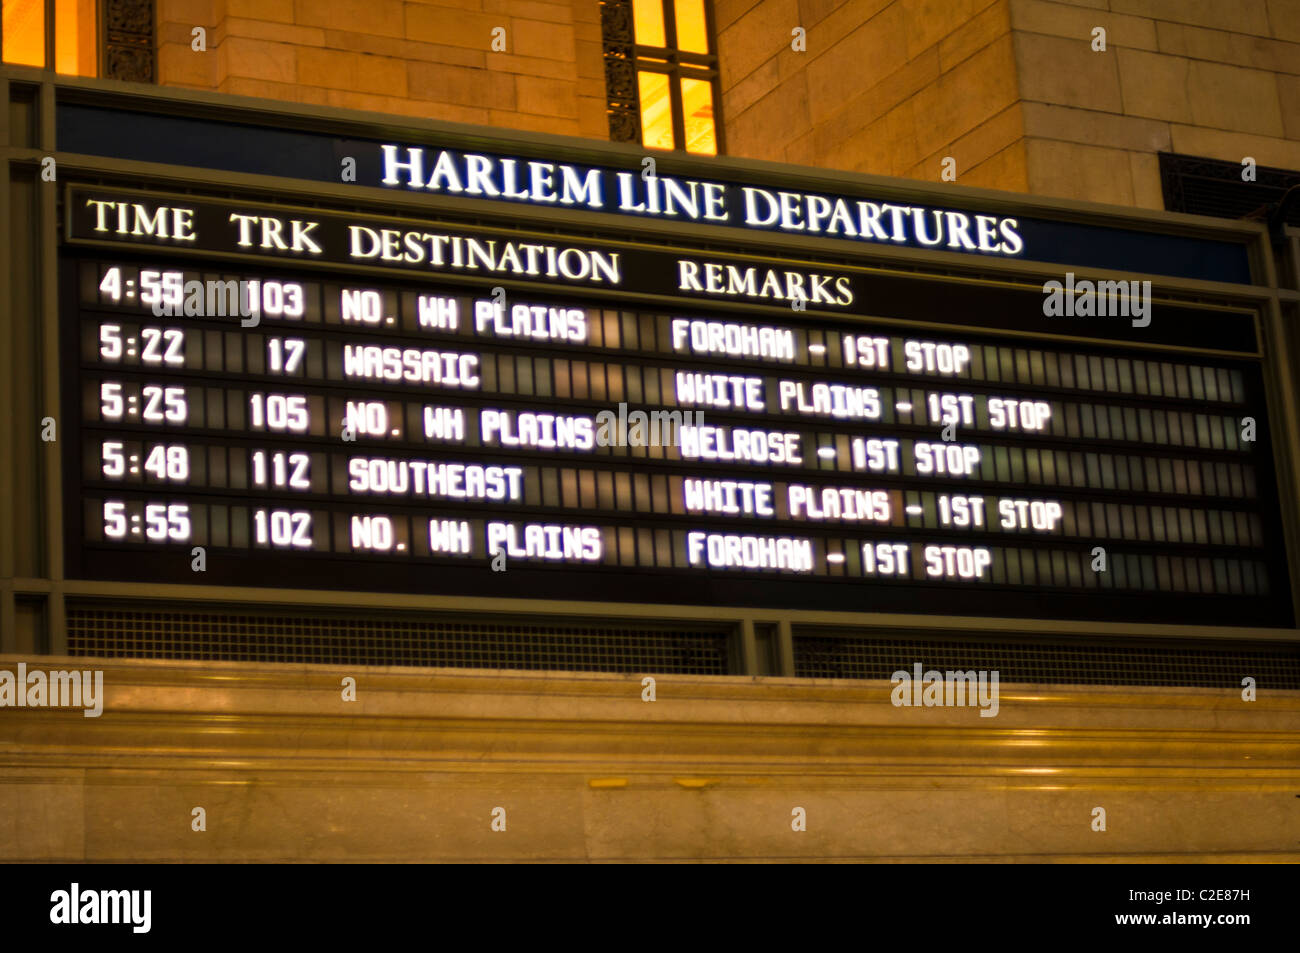 Harlem line departures schedule table at Grand Central Terminal railway station, Manhattan, New York City, USA Stock Photo